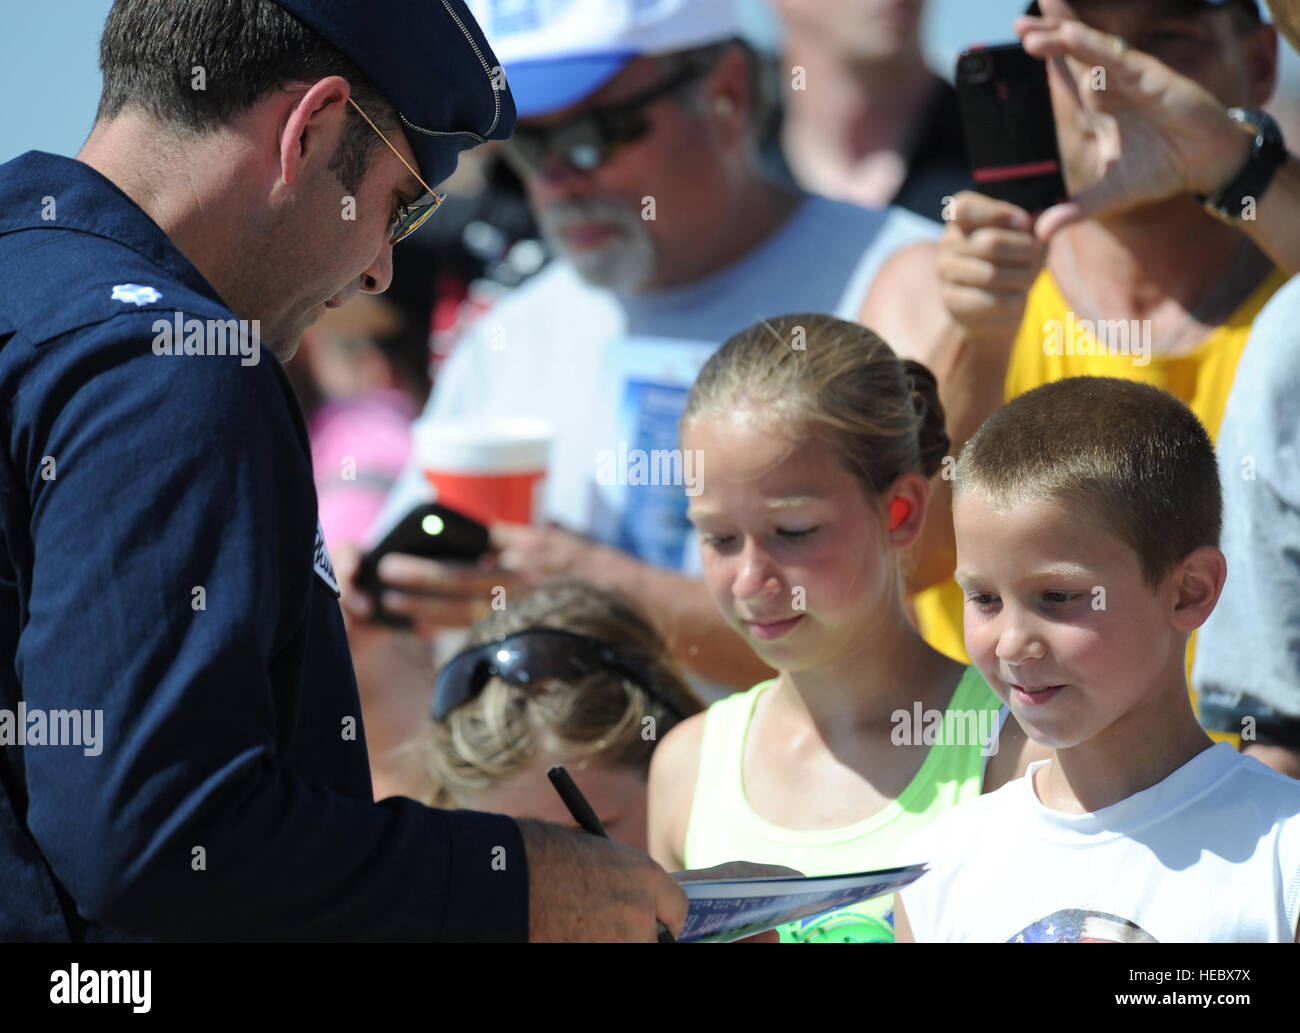 Lt. Col. Greg Moseley, Thunderbird 1, commander/leader, autographs a brochure as a young fan looks on with admiration following the performance at the Star Spangled Salute Air Show, Tinker Air Force Base, Okla., June 22, 2014. (U.S. Air Force Photo/Master Sgt. Stan Parker) Stock Photo